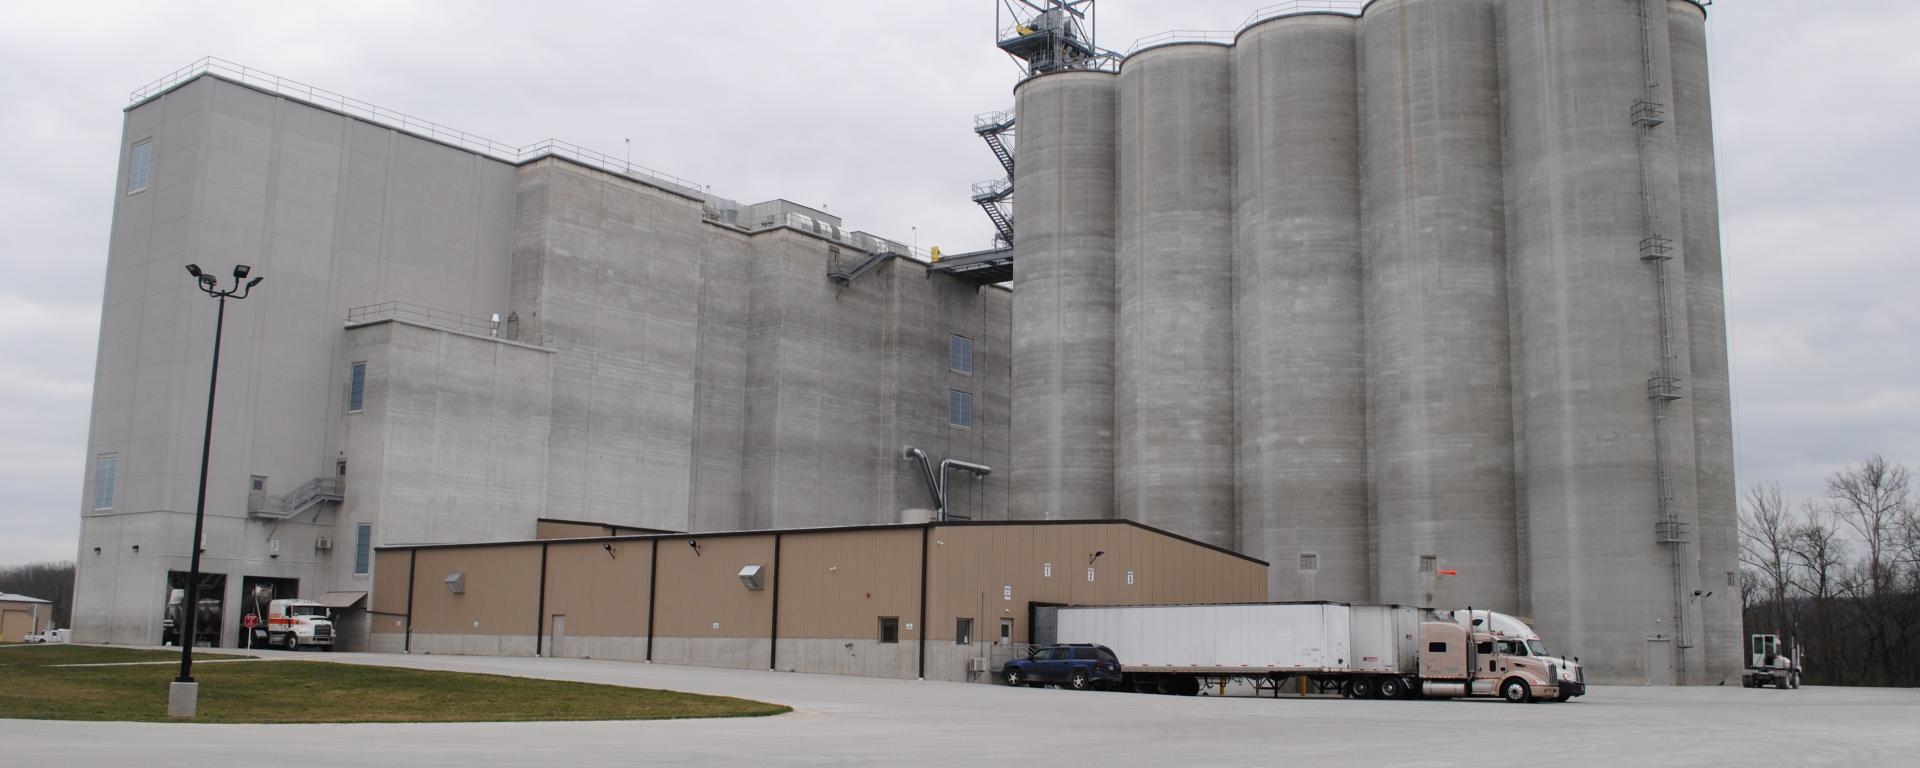 streetscape of silos and building